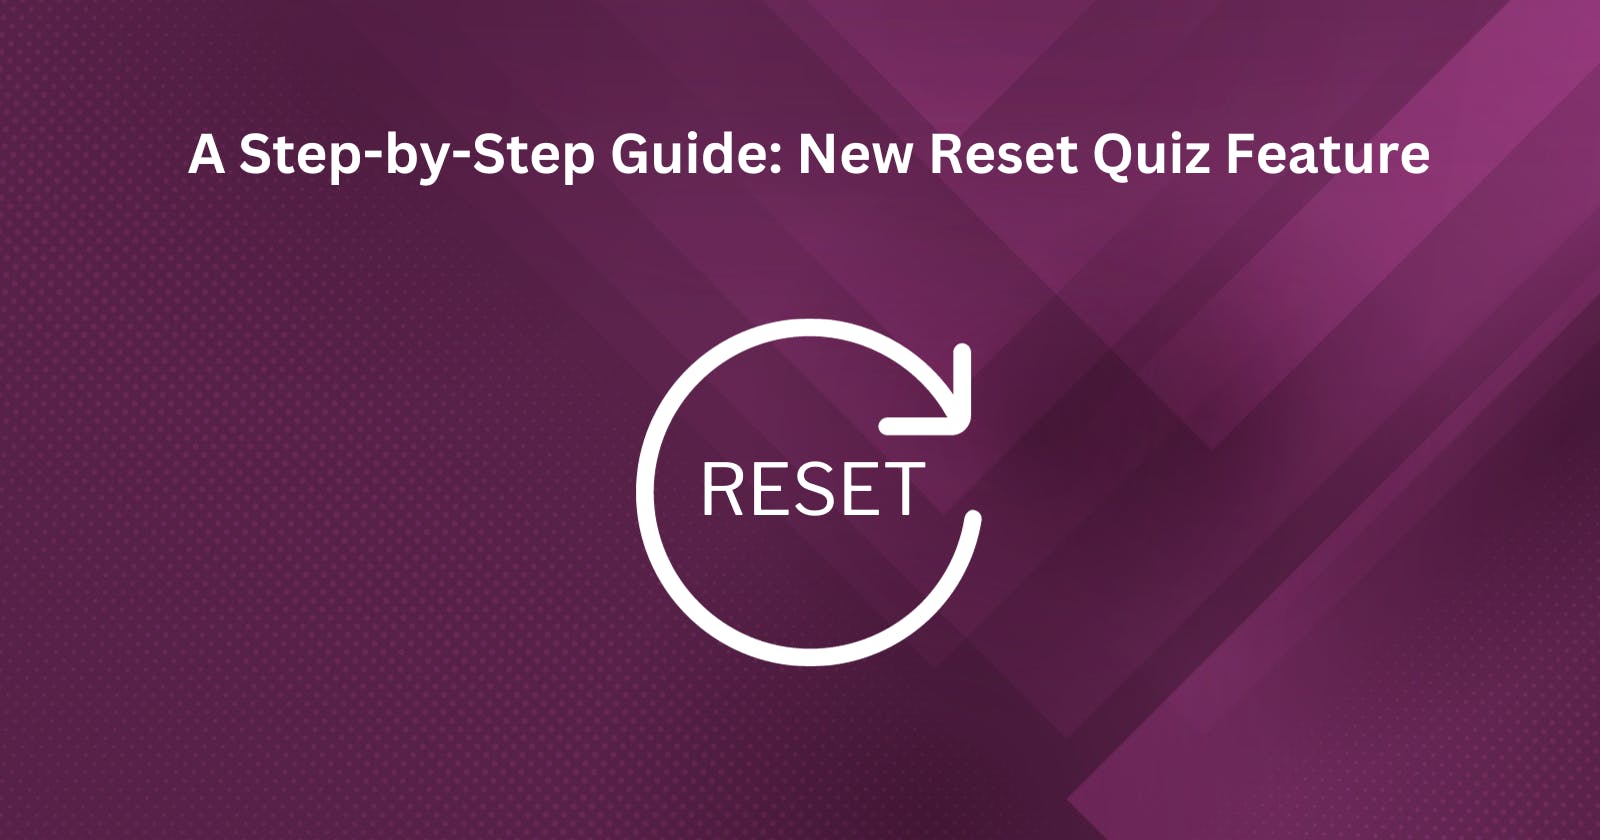 A Step-by-Step Guide: New Reset Quiz Feature on QuizHub